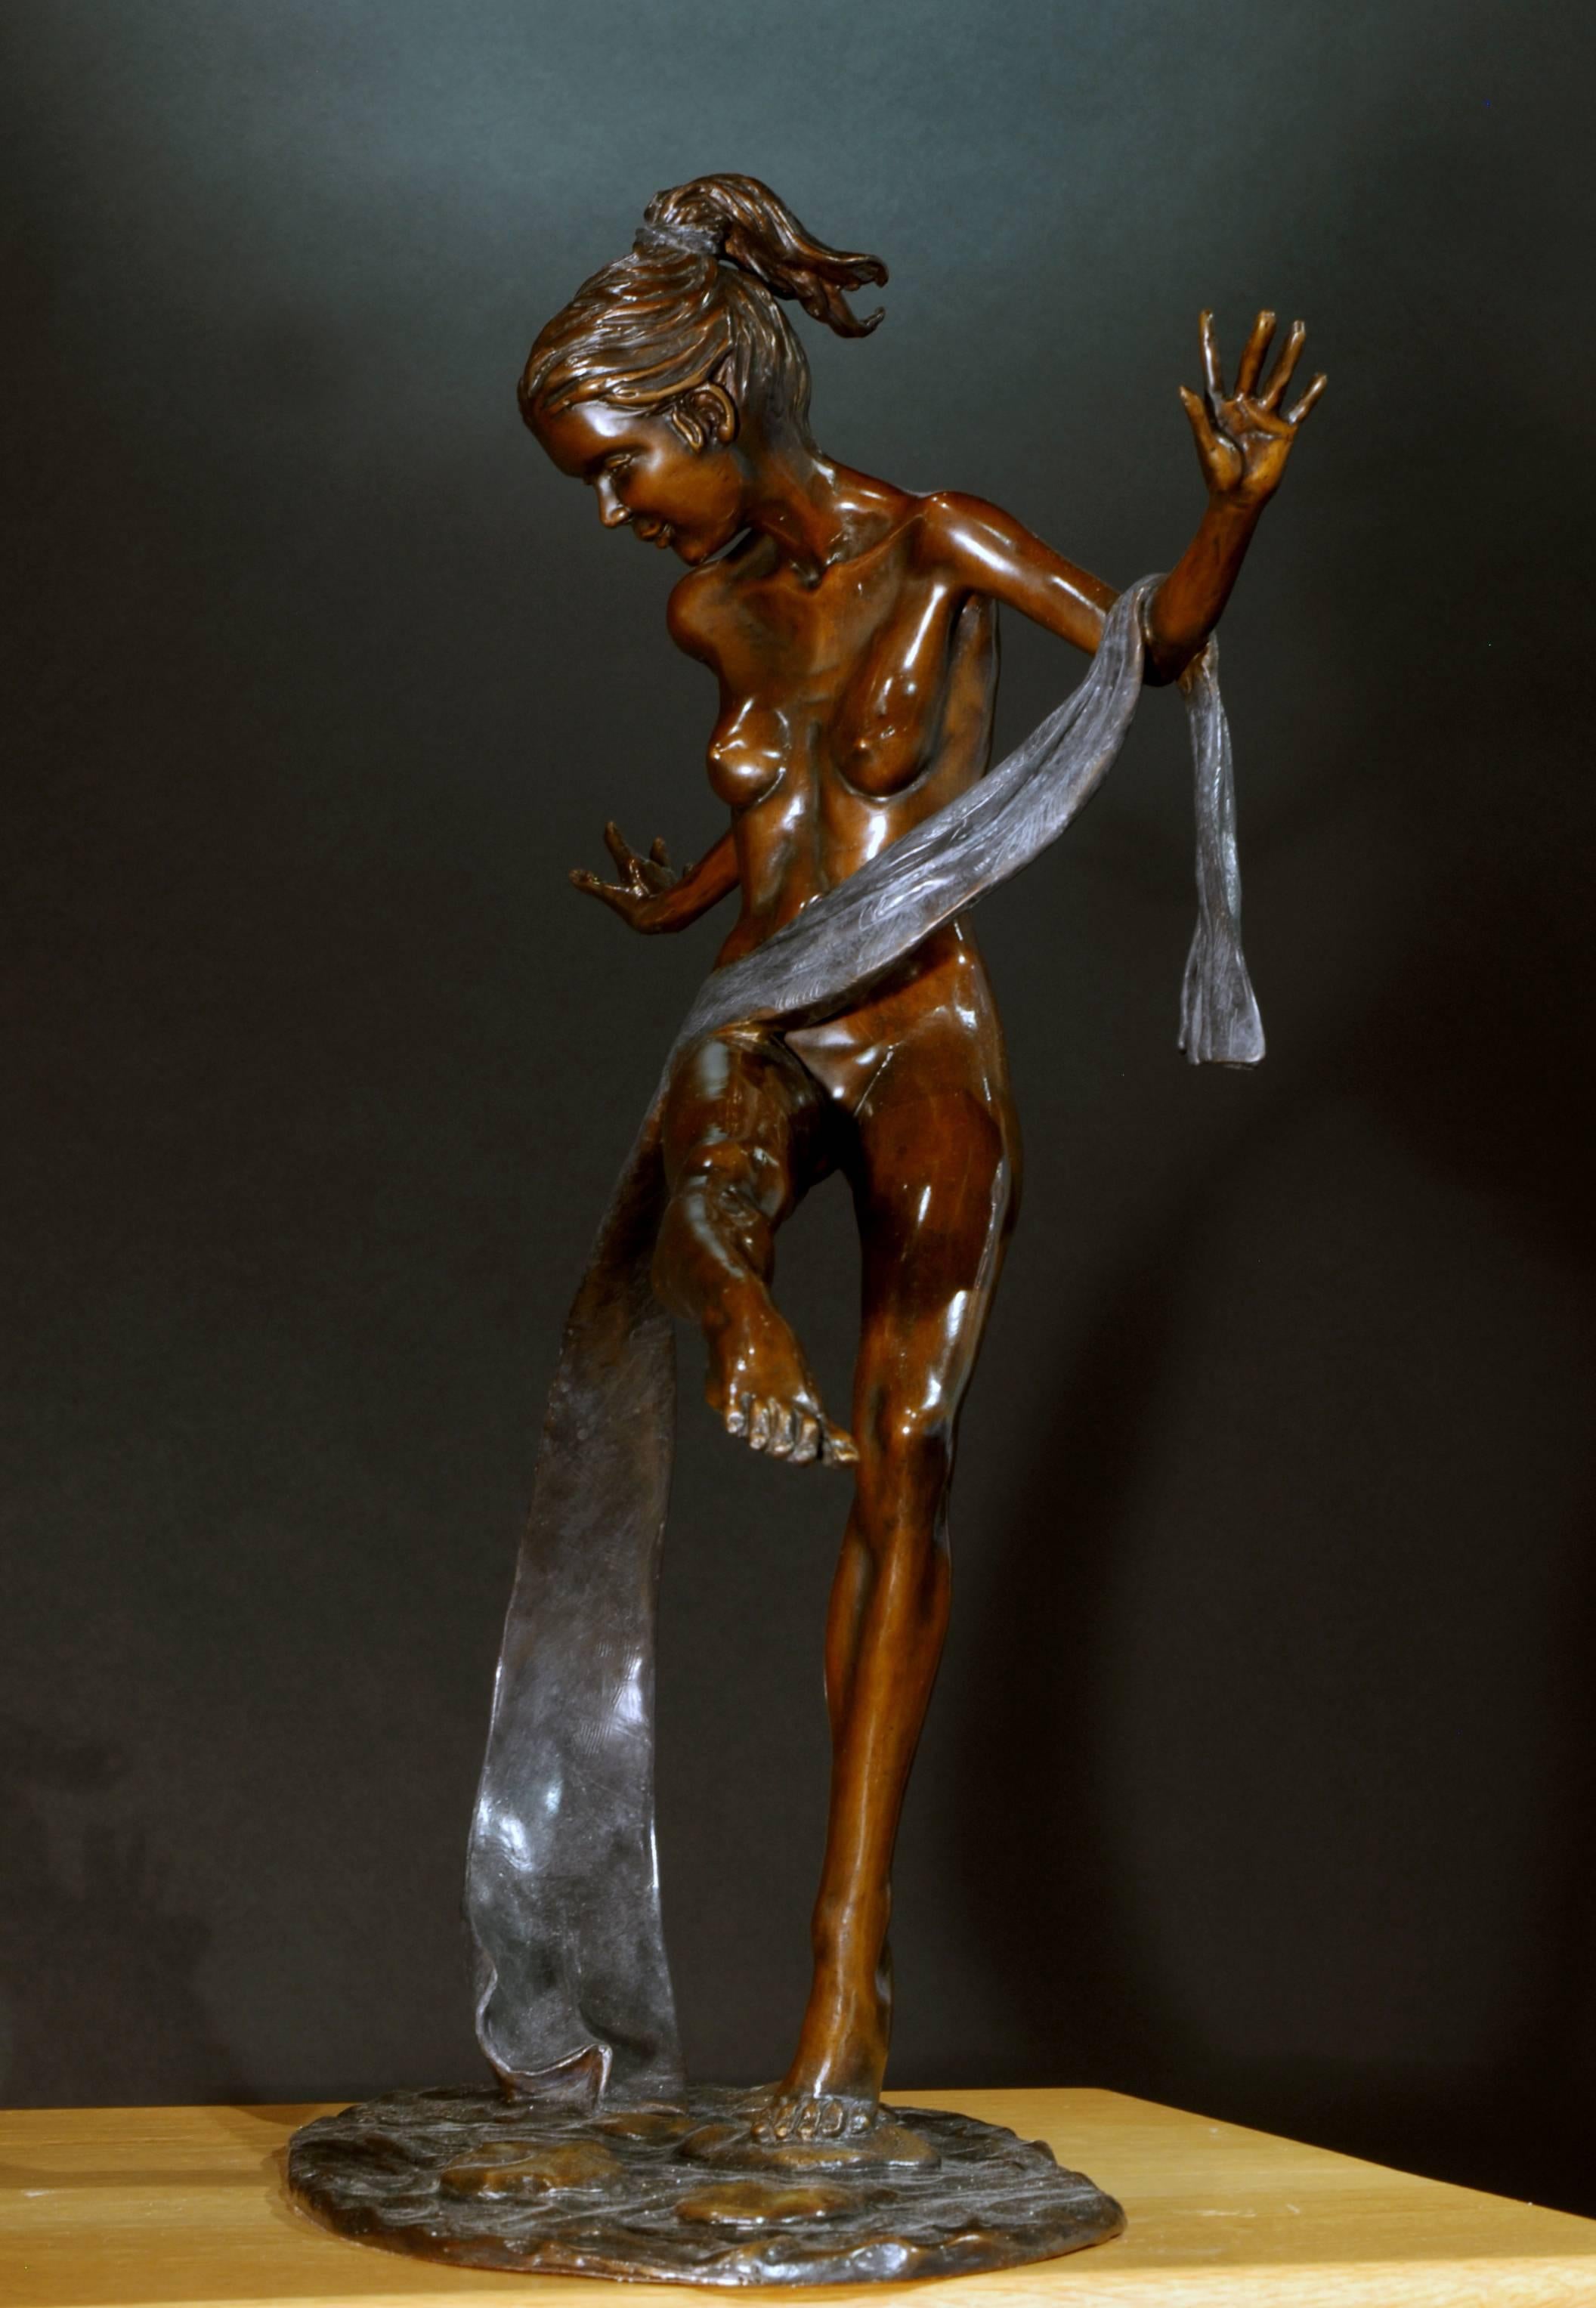 'Stepping Stones' by Benson Landes is a Solid Bronze 20th Century Nude Ballet Dancer - she is so light on her feet and beautifully elegant.
For Benson Landes, sculpture was most definitely a passion. His oeuvre of cast bronzes is populated with ‘off